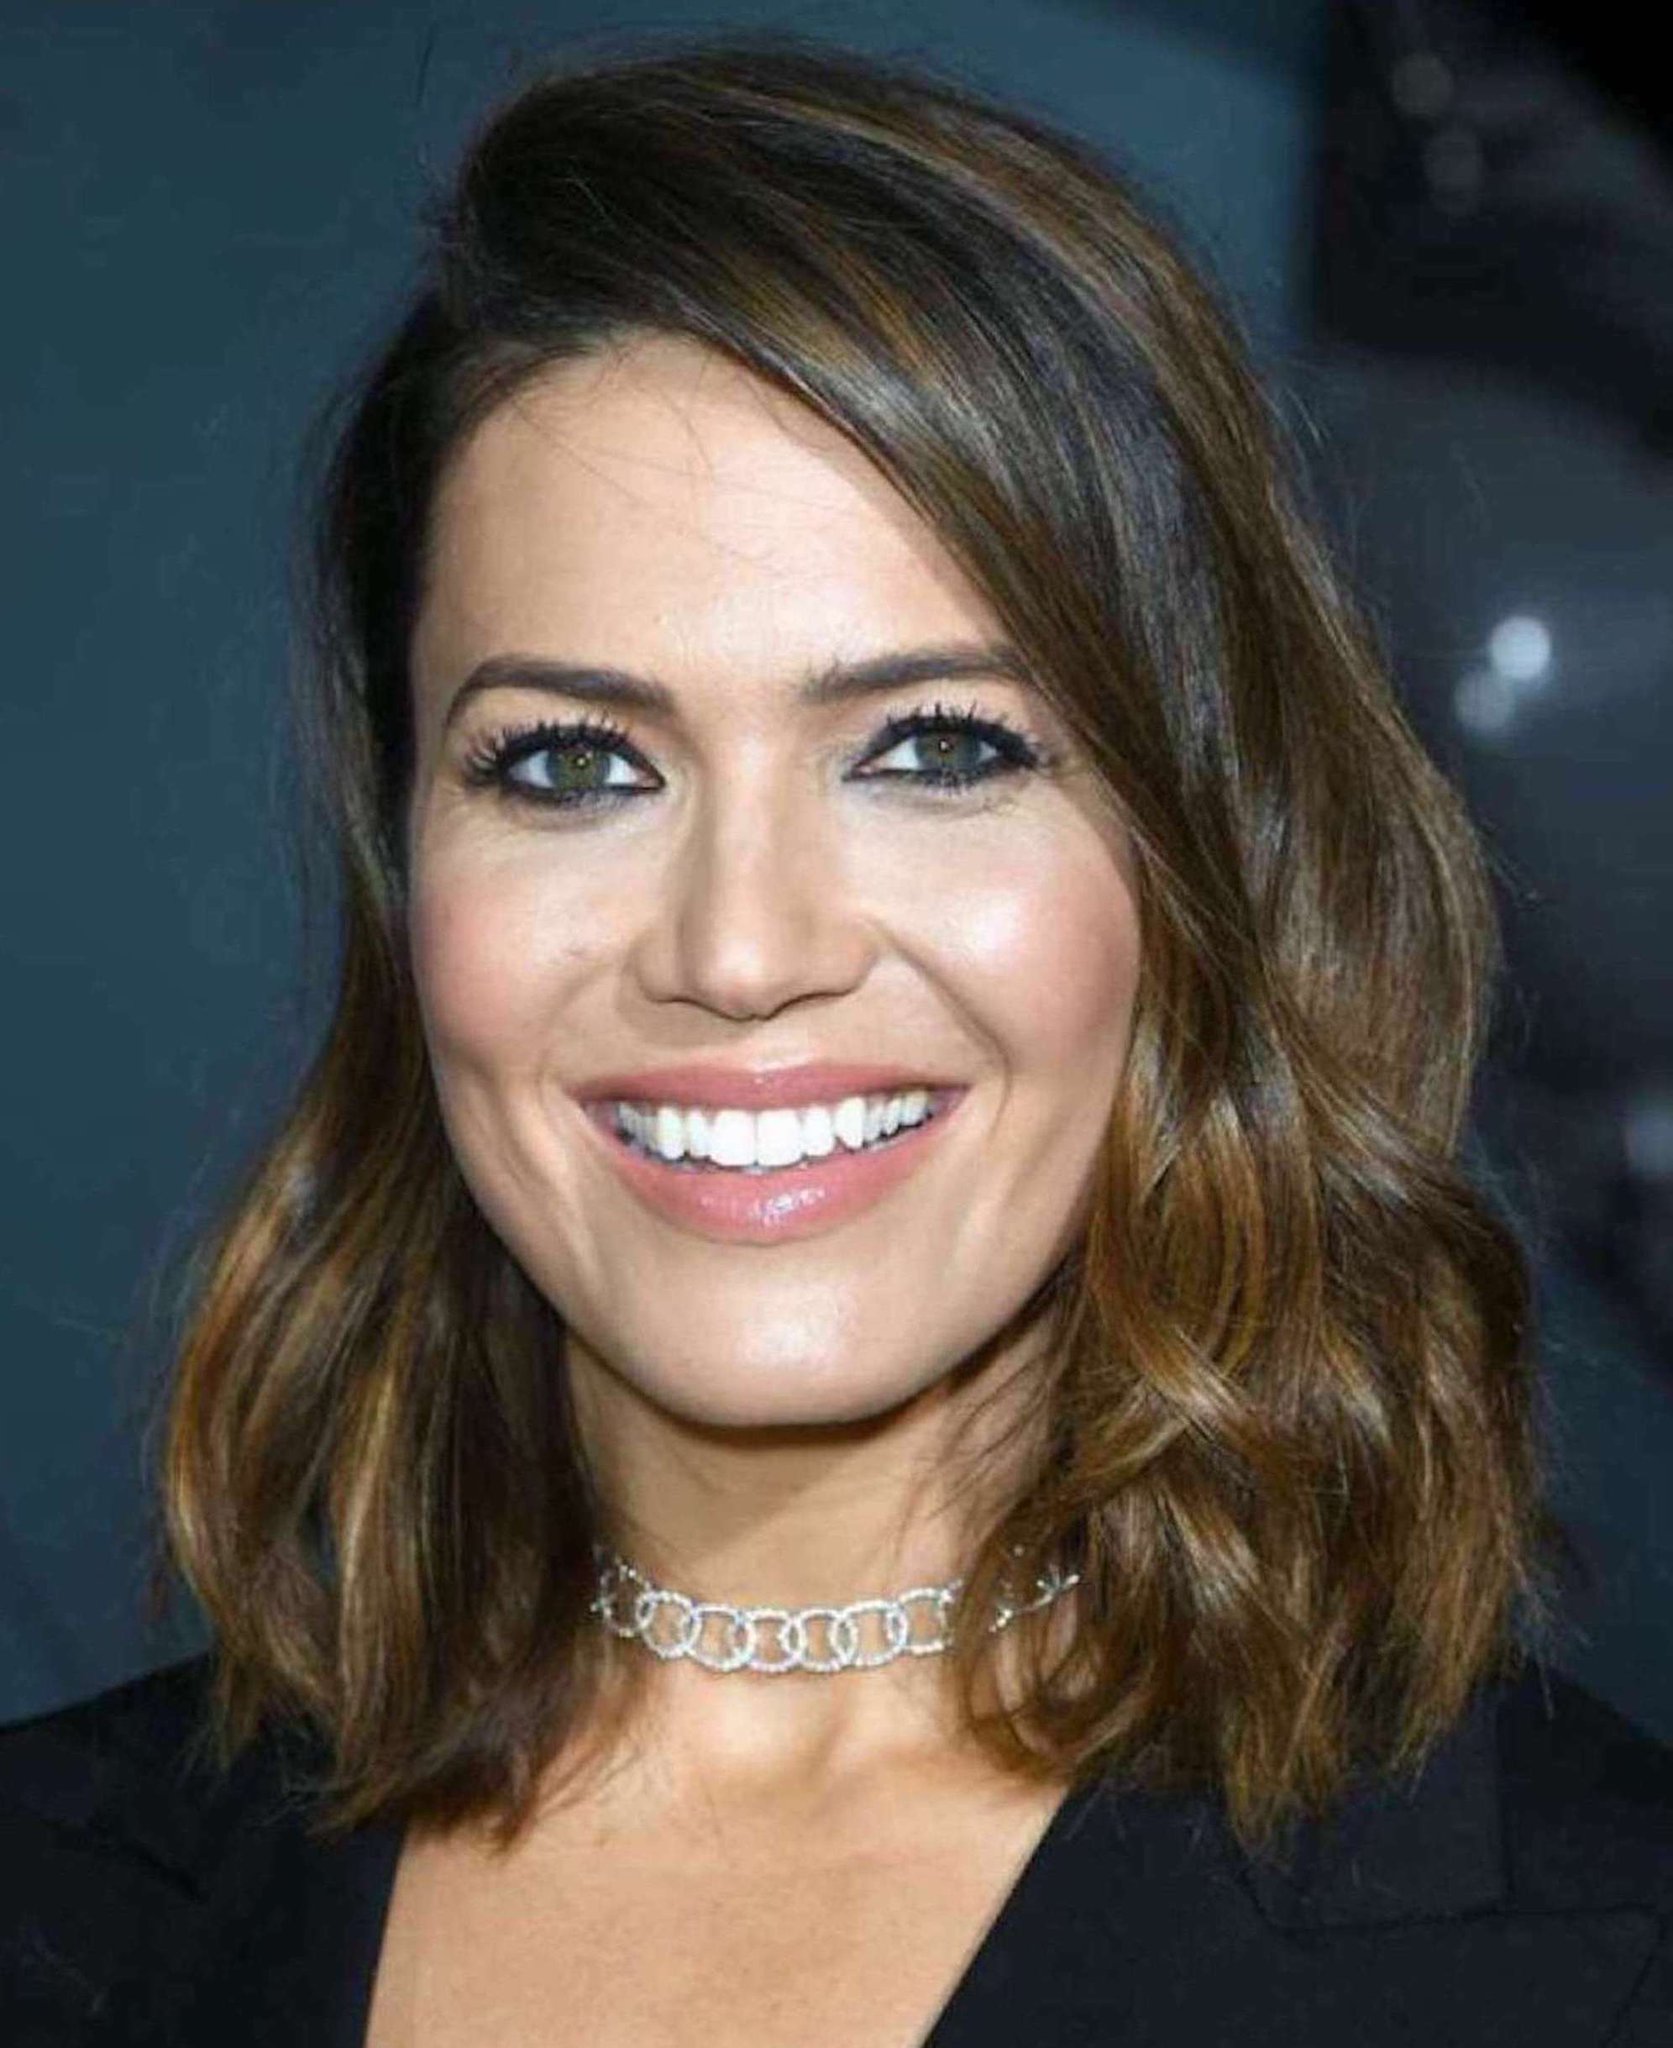 Happy 38th birthday to (Mandy Moore)! The voice actress who played Rapunzel from Tangled. 